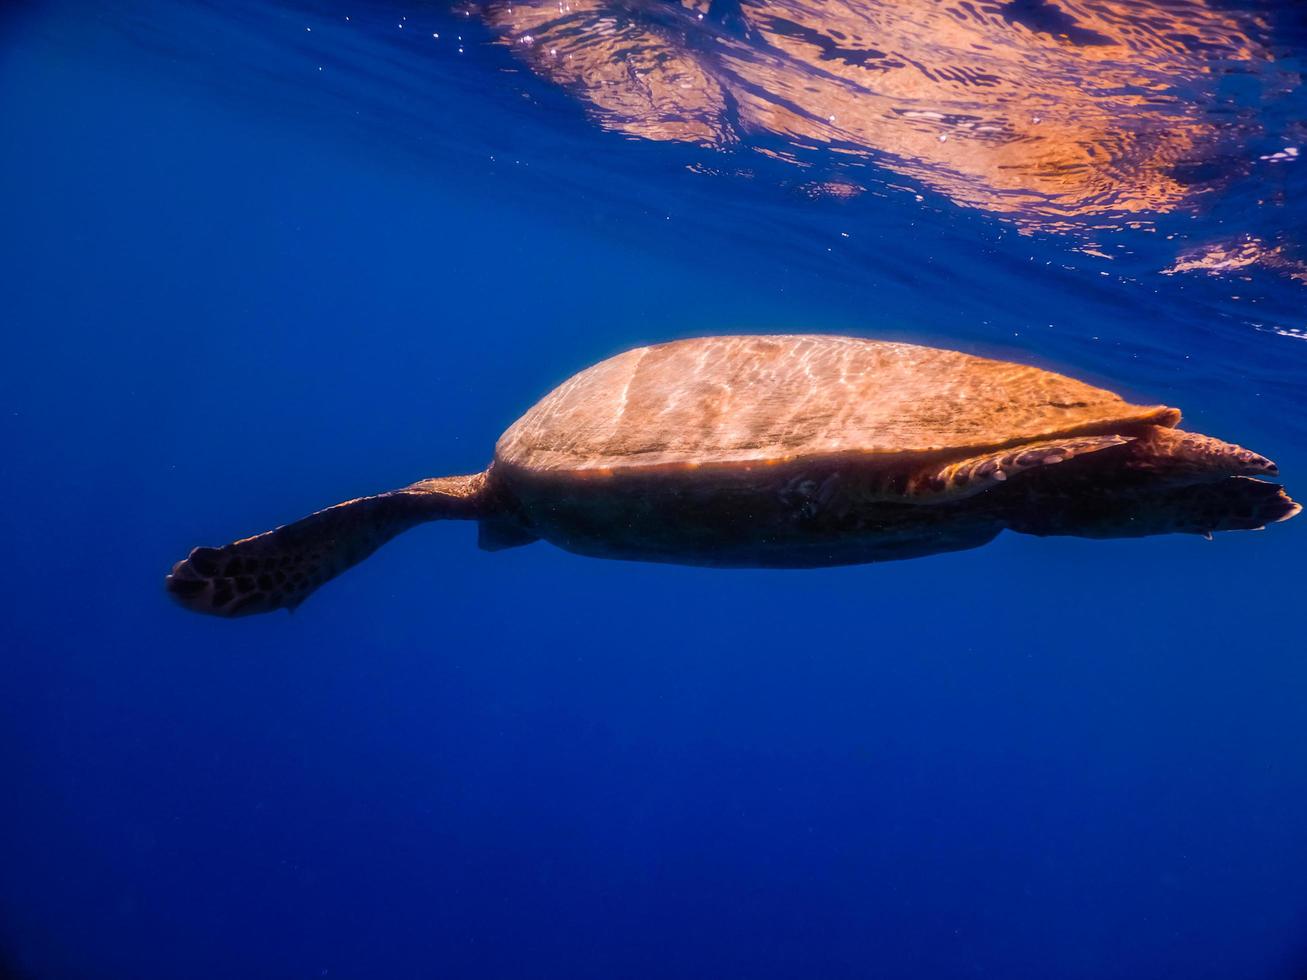 green sea turtle after breathing at the surface in deep blue water with reflection photo